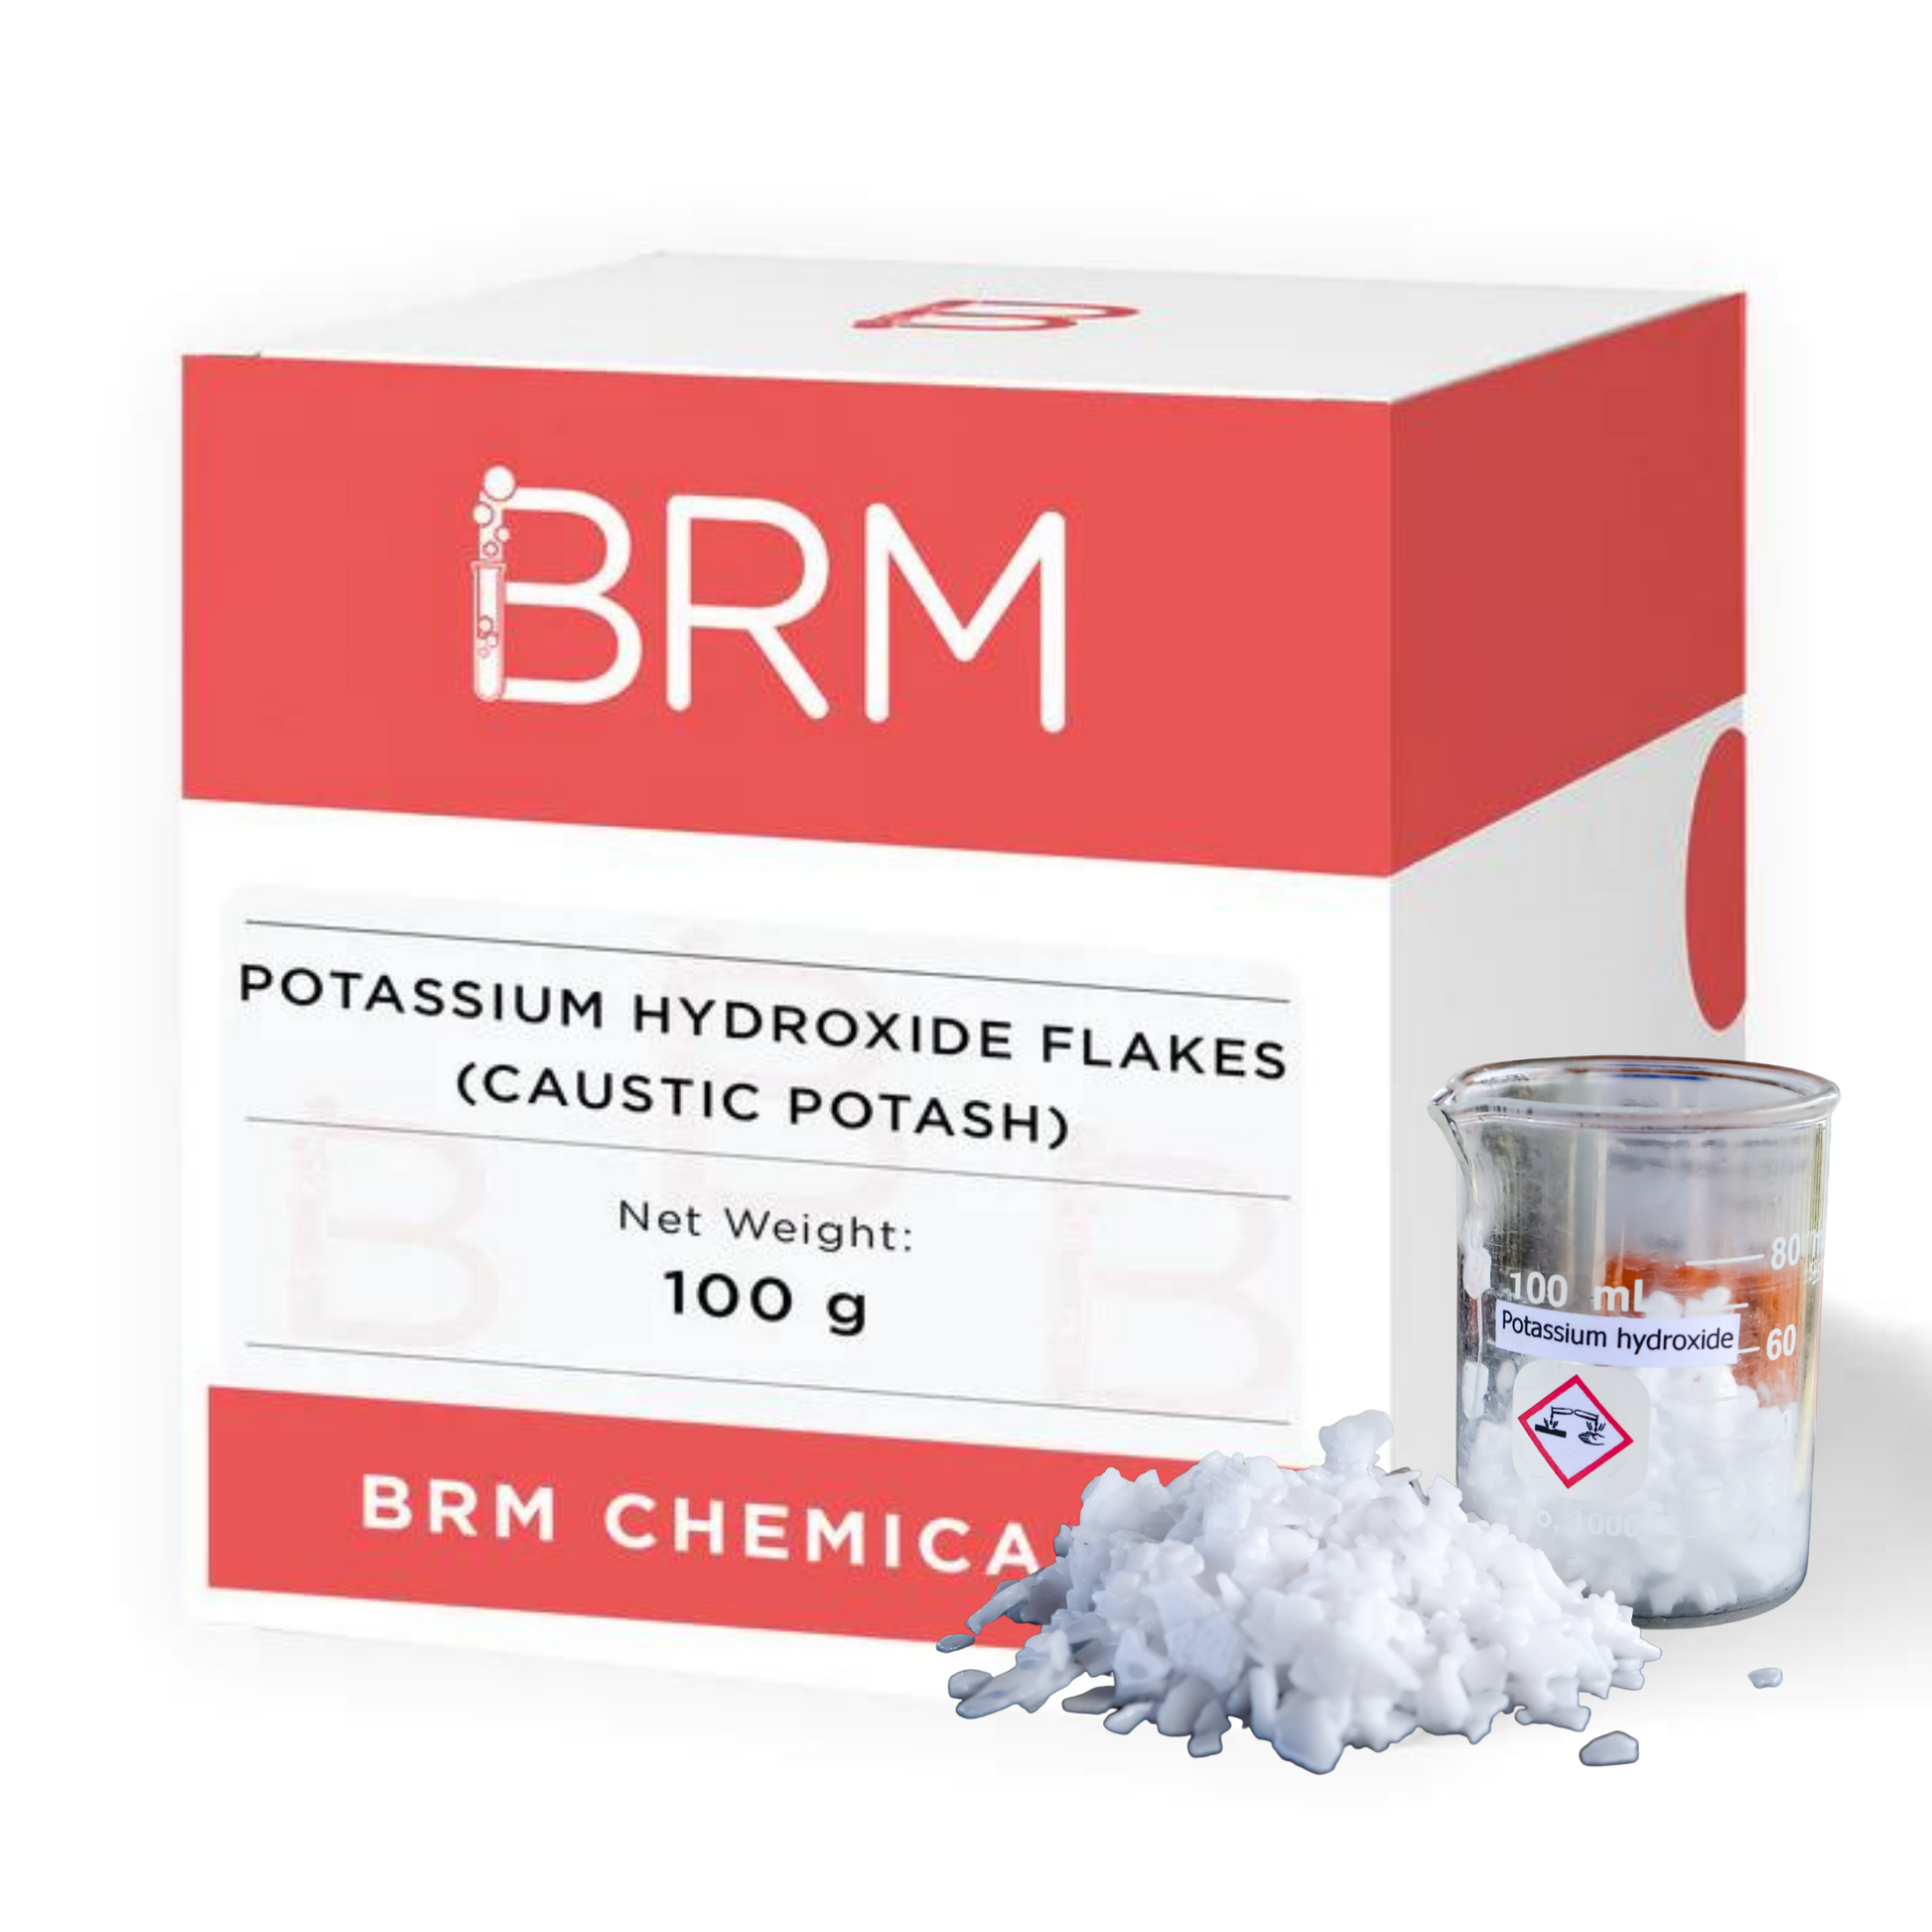 BRM Chemicals Potassium Hydroxide Flakes for Soap Making, Shampoo,  Cosmetics, Moisturizer & Lotion Making, Domestic Use, DIY Personal Care for  Face, Hair, Skin & Body